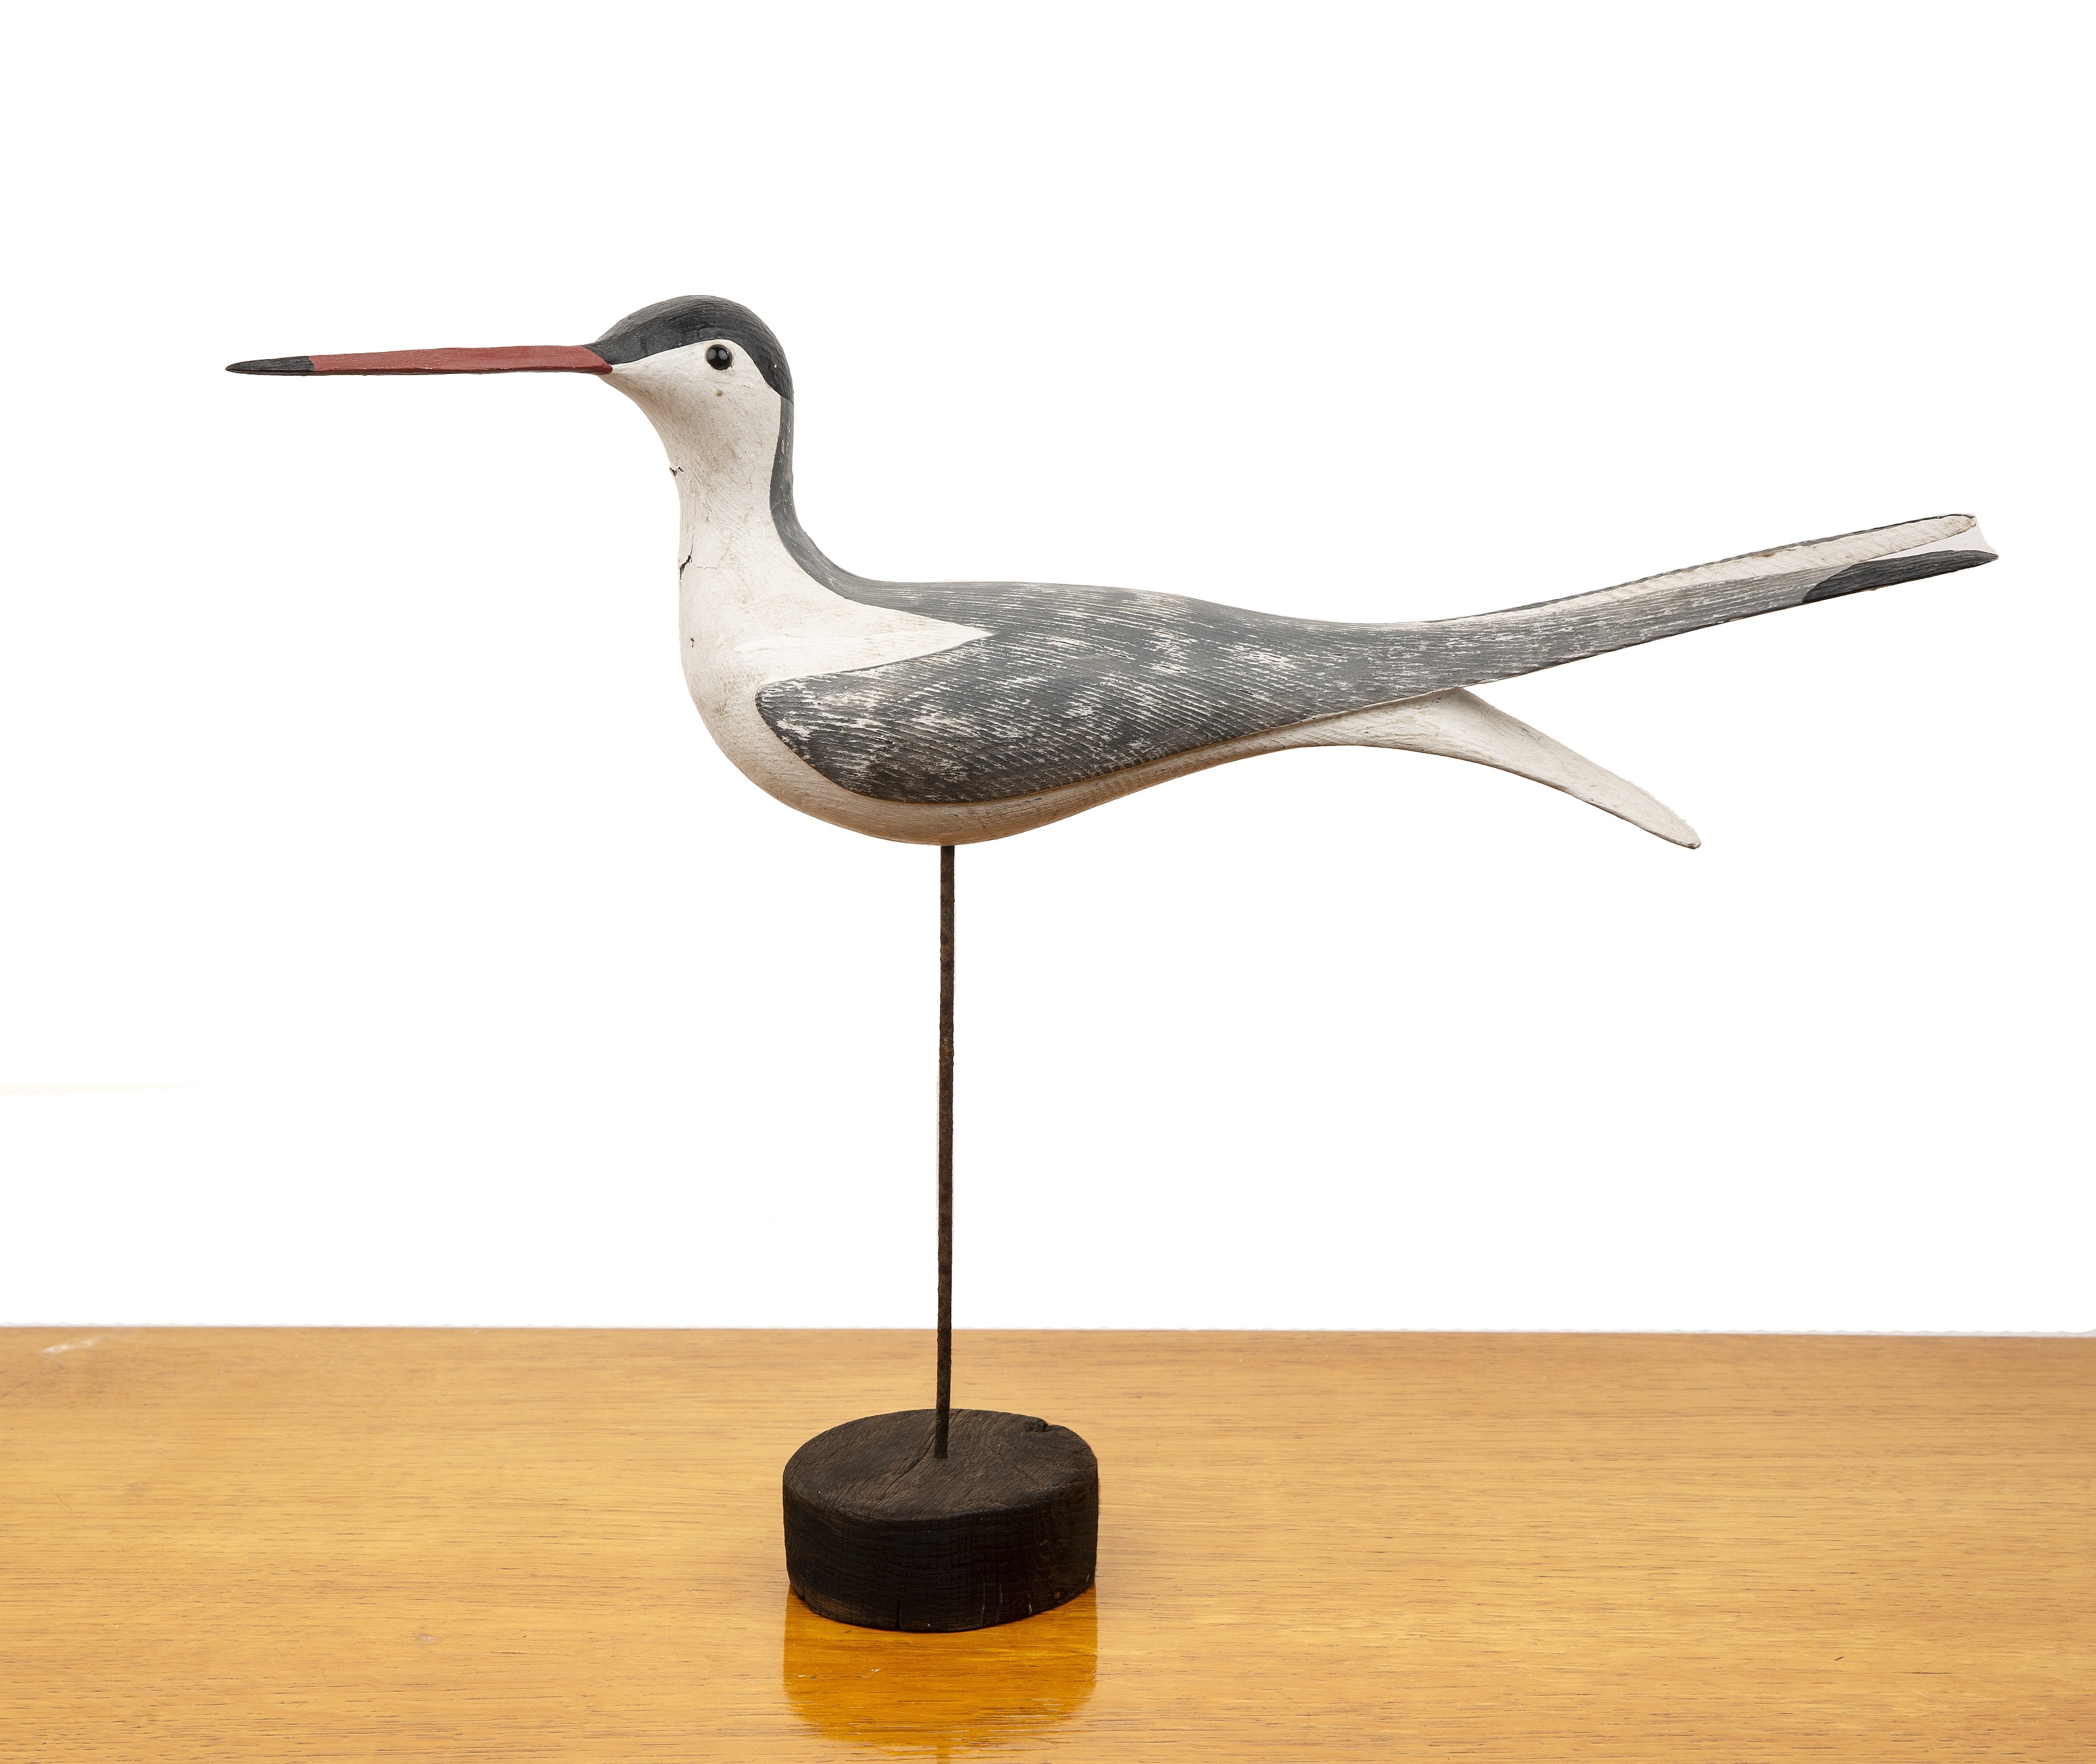 Artwork by Guy Taplin, Tern, Made of carved and painted sculpture